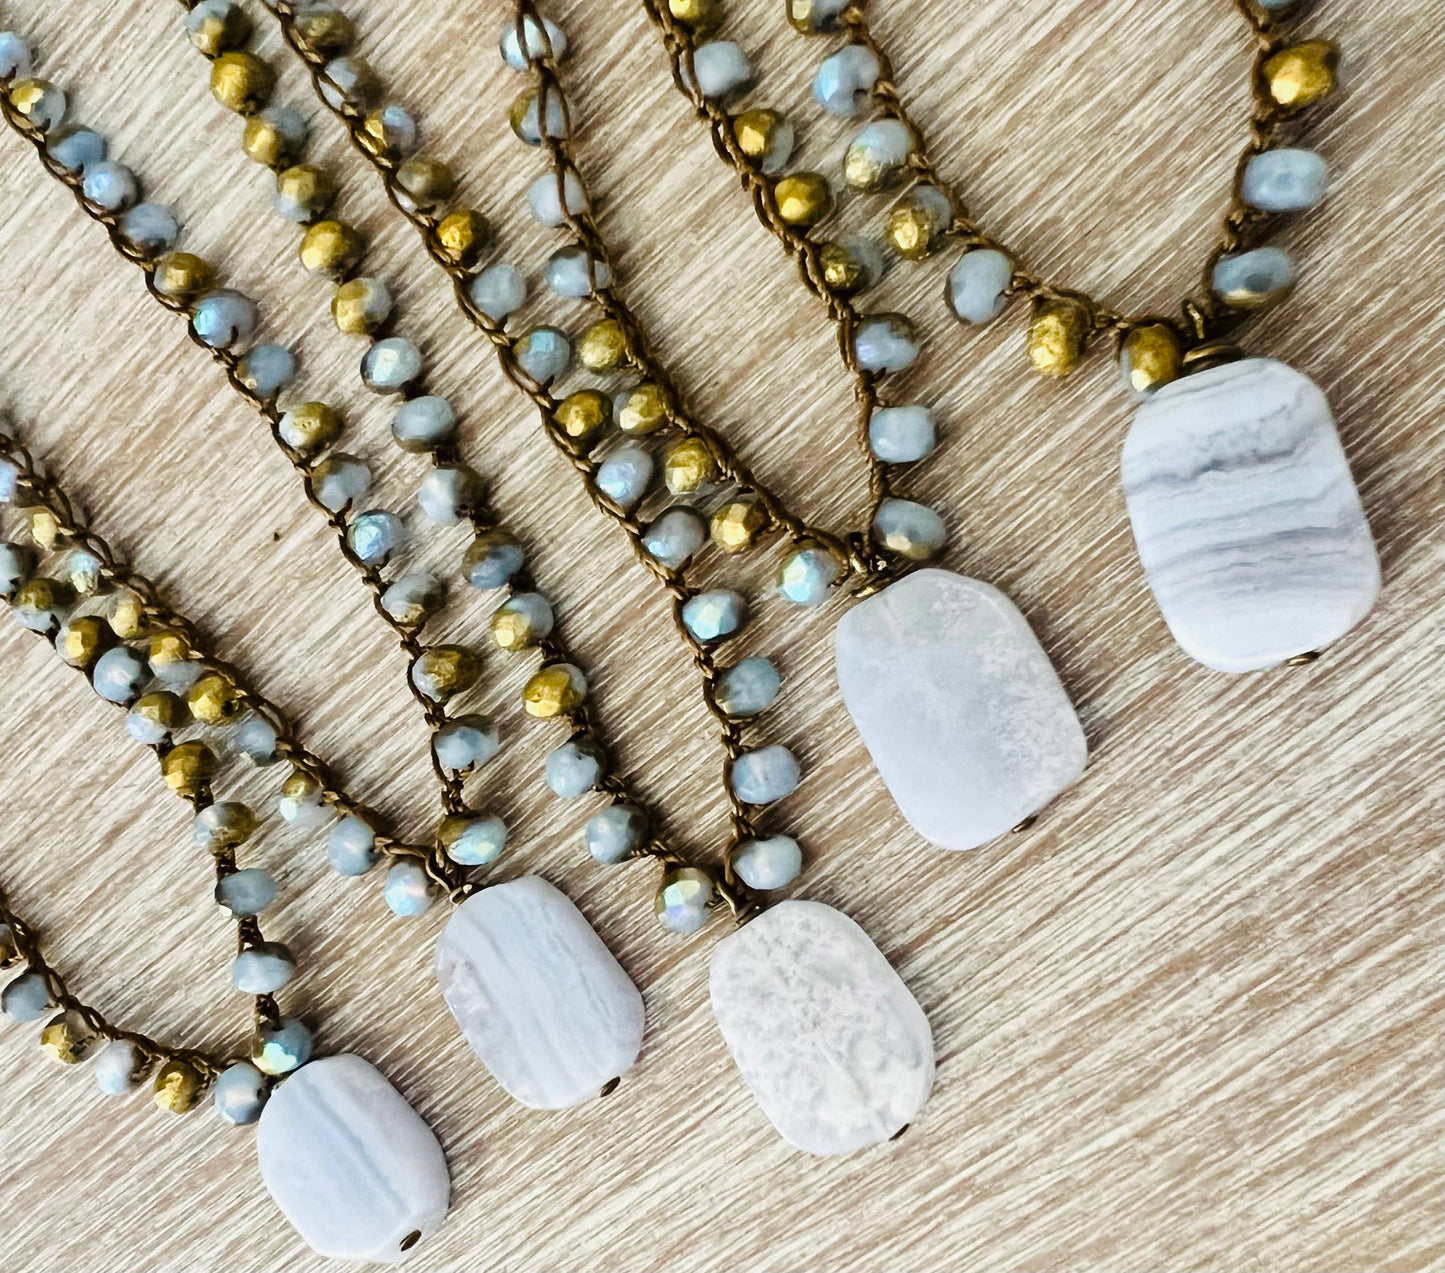 Blue Lace Agate Natural Stone Necklace With Autumn Gold